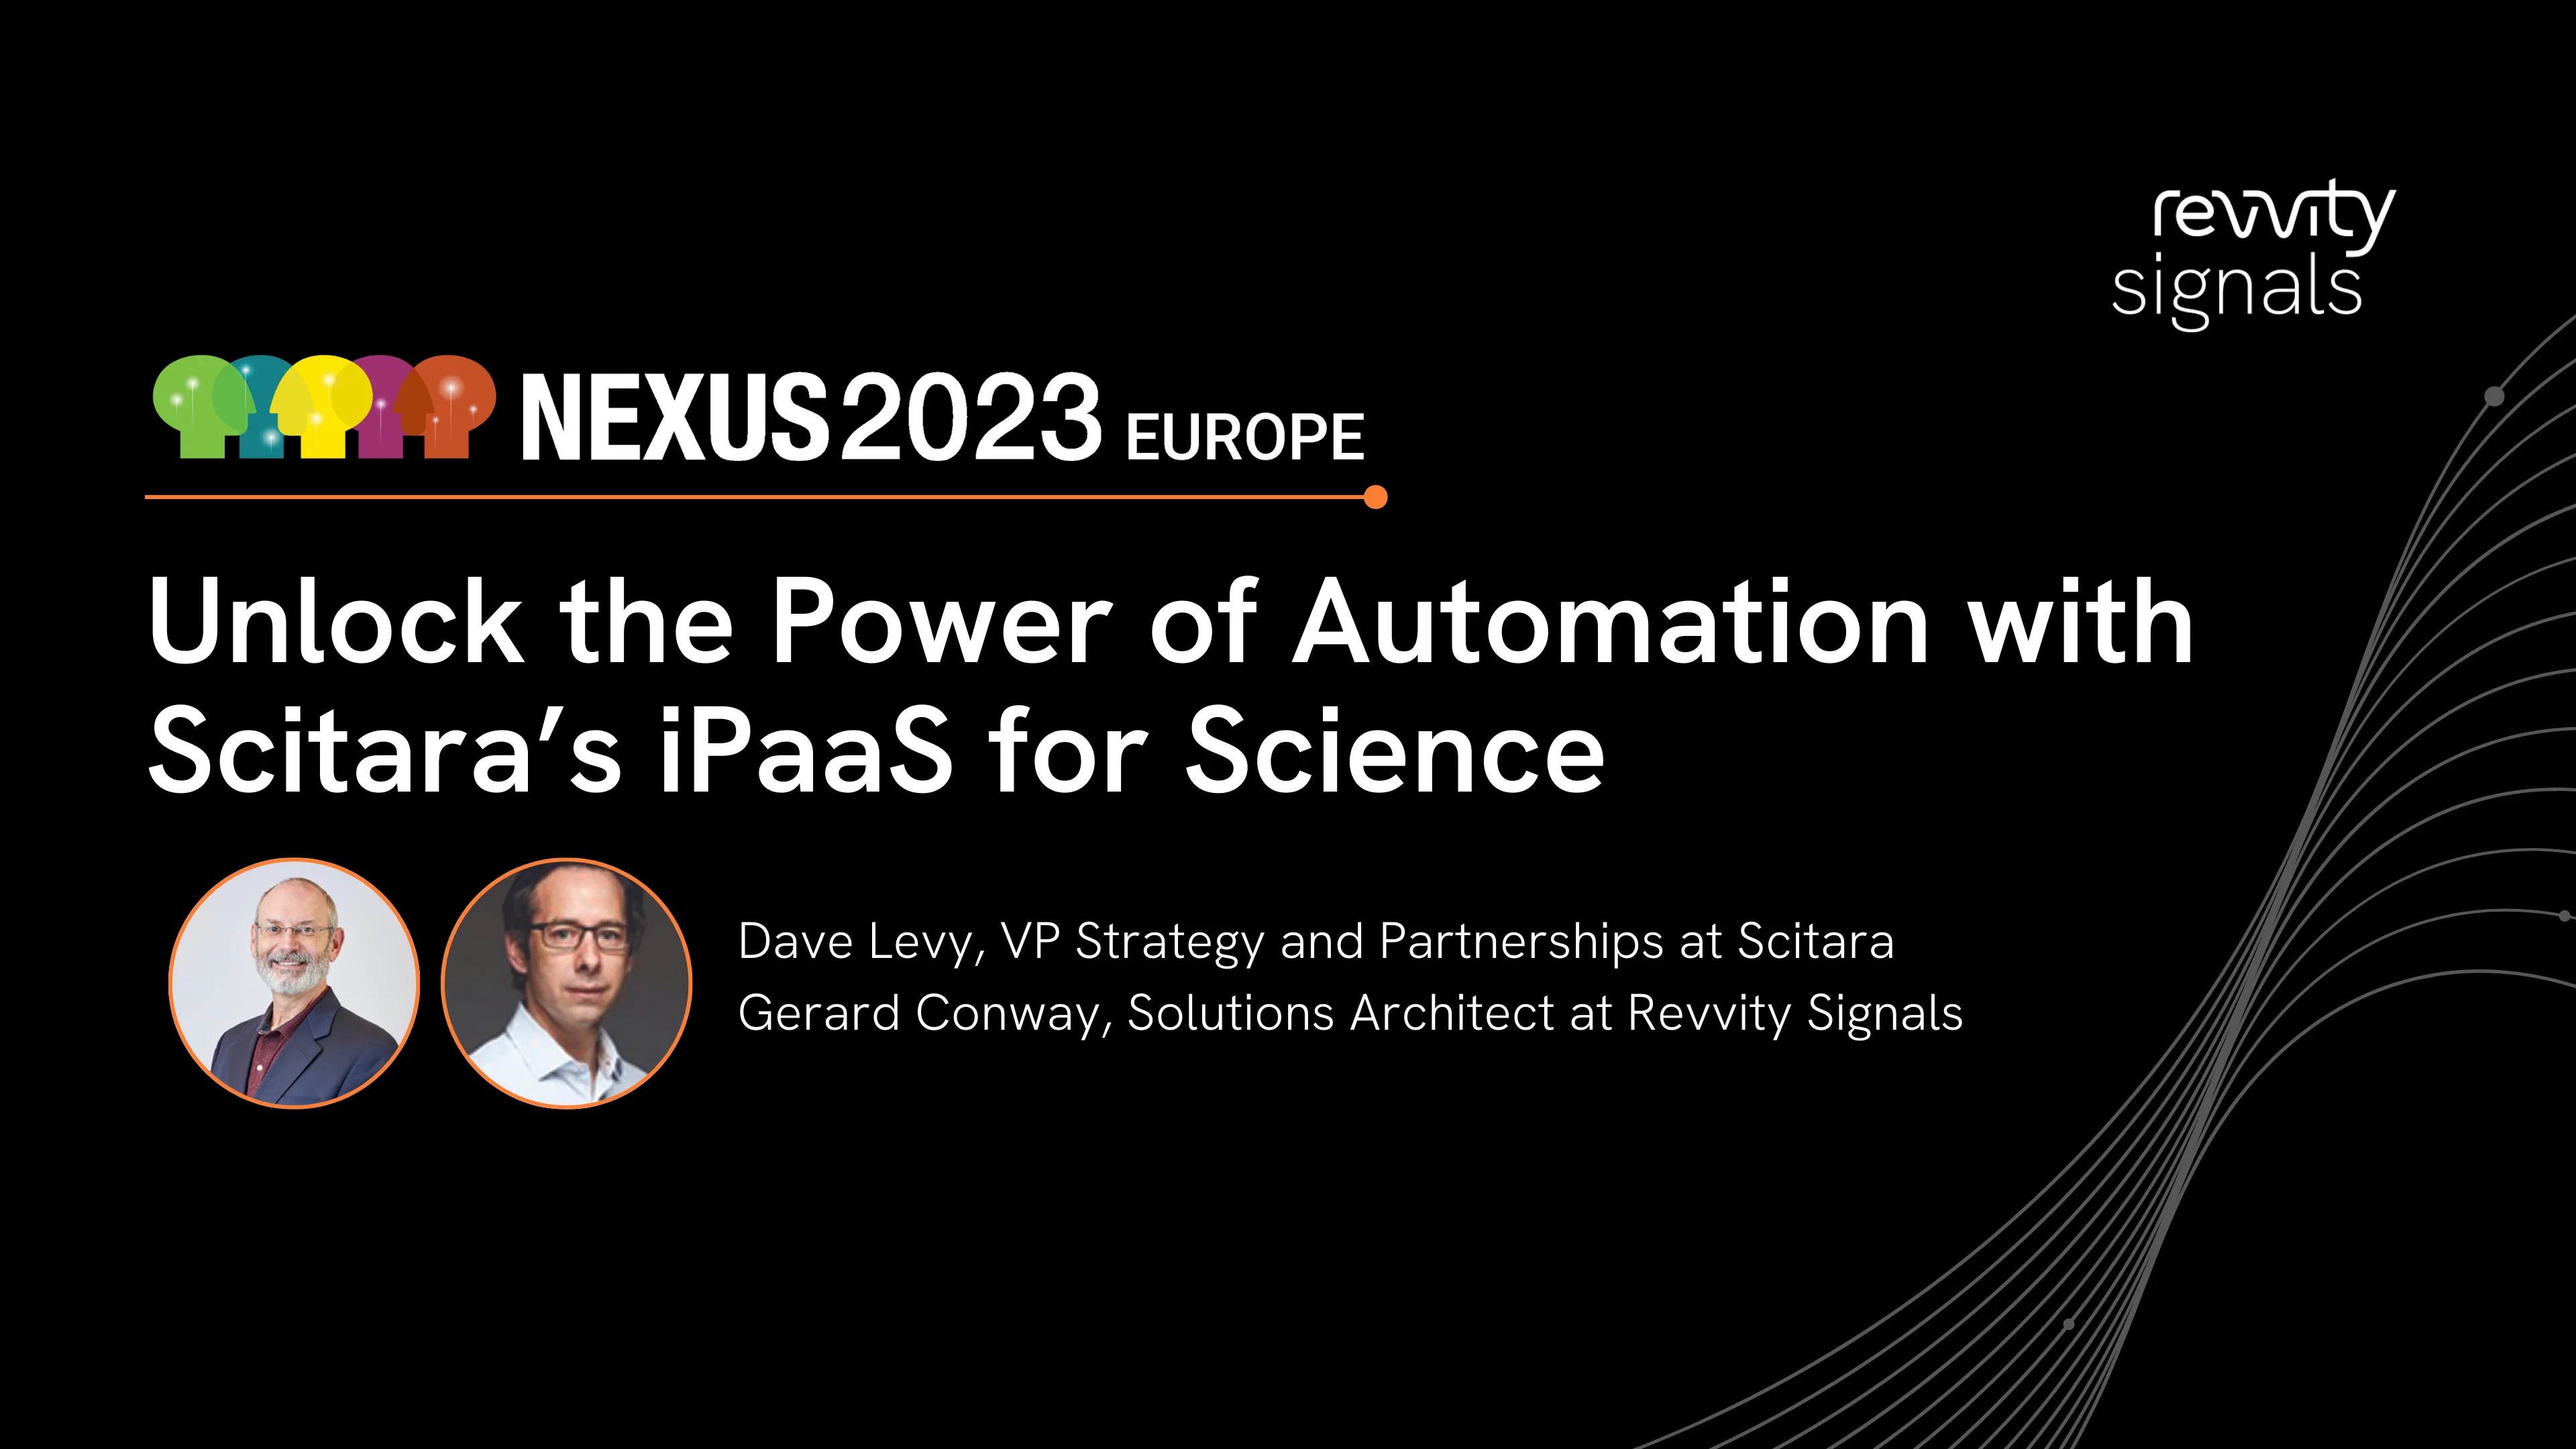 Watch Day 1, EU NEXUS 2023 - Unlock the Power of Automation with Scitara's iPaaS for Science on Vimeo.